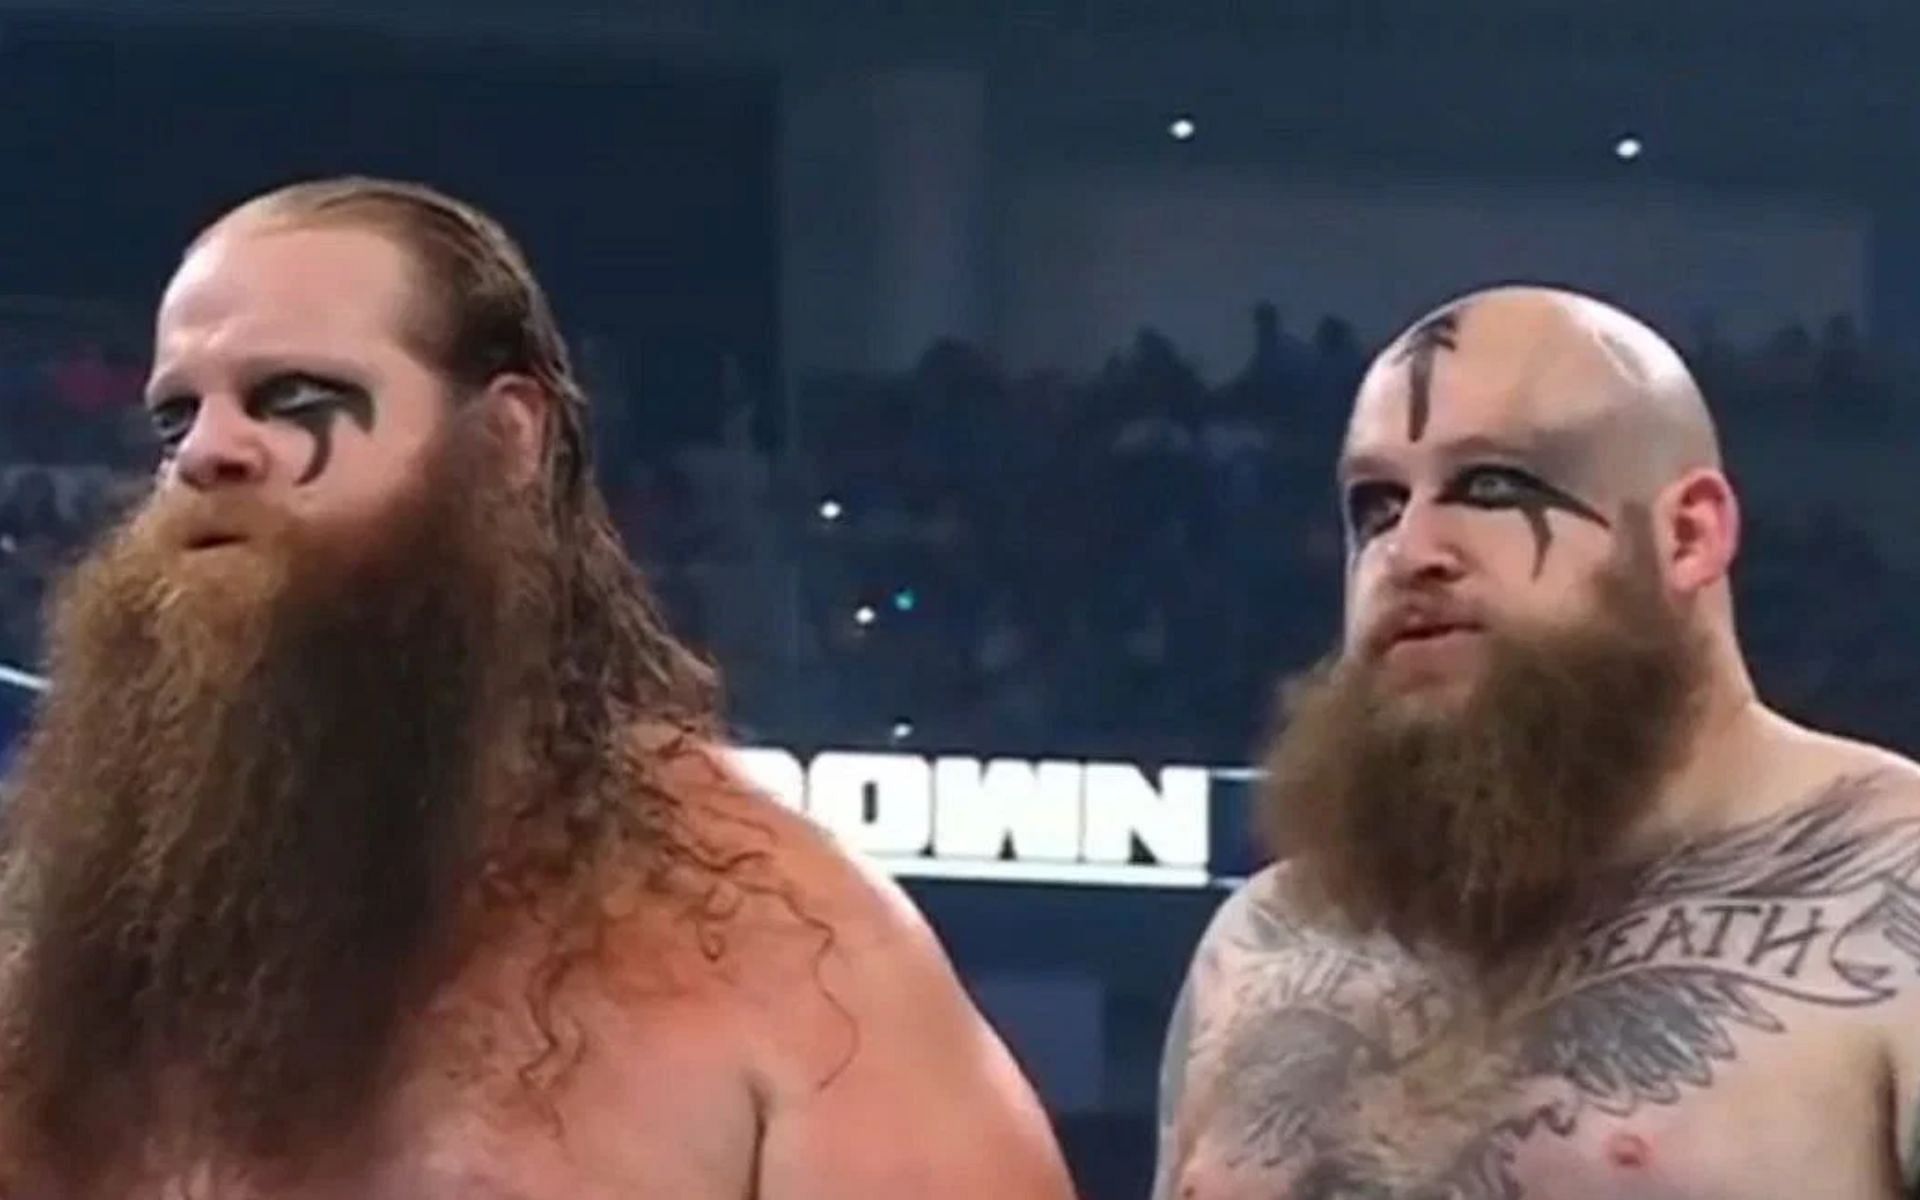 The former tag team champions have been seen in various vignette